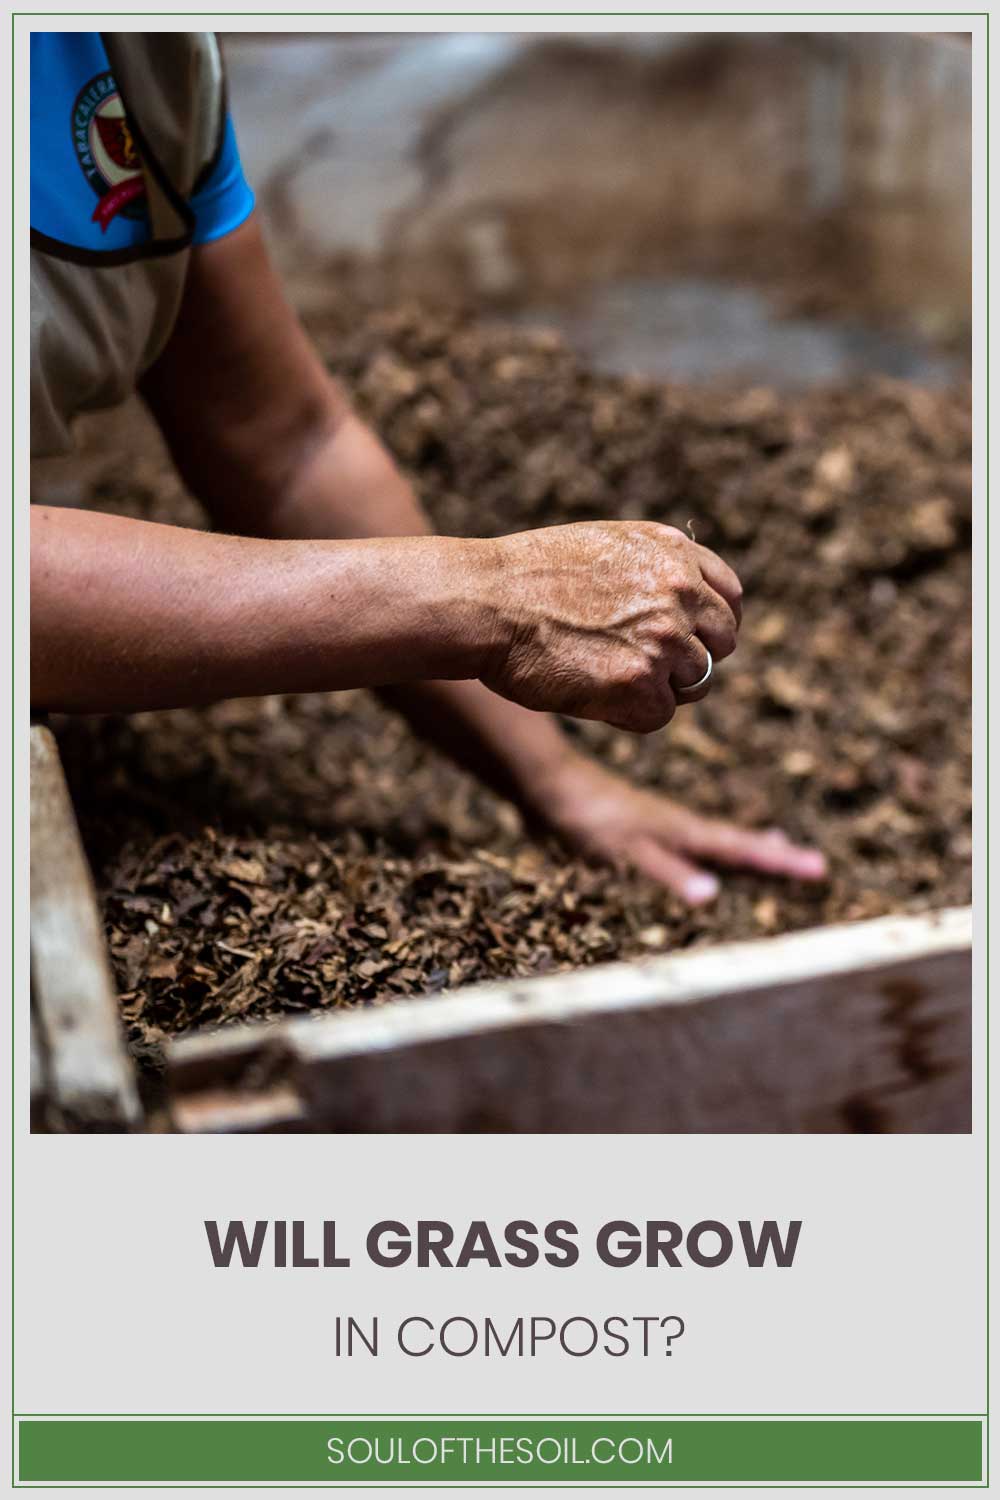 Will Grass Grow in Compost?